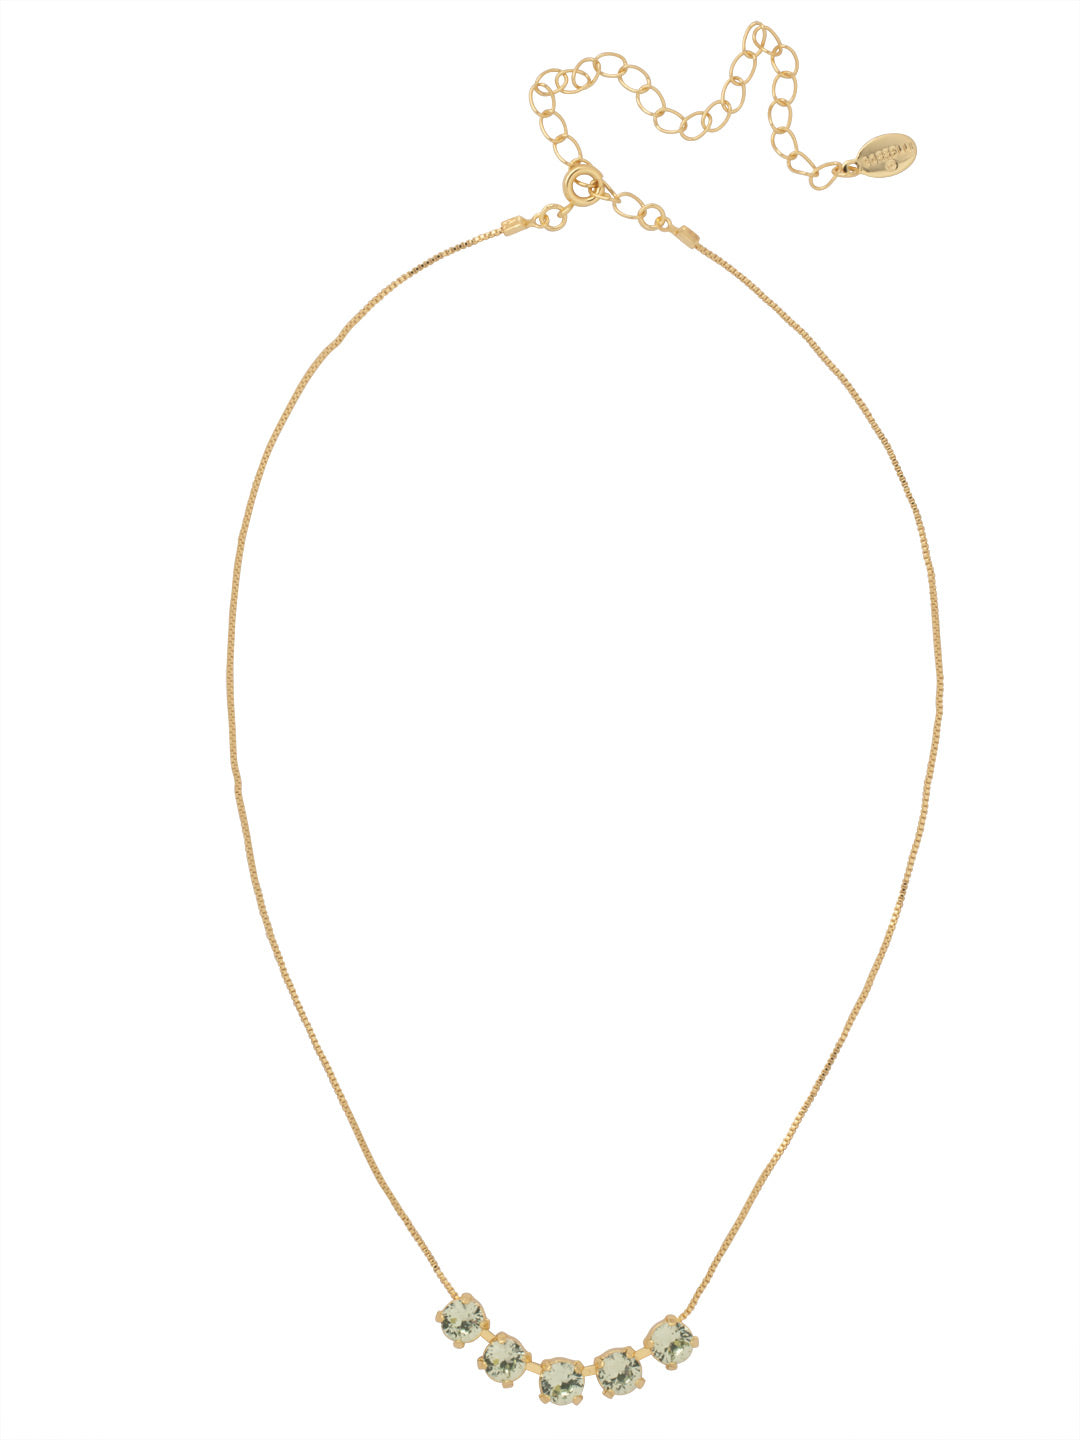 Shaughna Tennis Necklace - NFC84BGMIN - <p>The Shaughna Tennis Necklace features five crystals on a delicate adjustable chain. From Sorrelli's Mint collection in our Bright Gold-tone finish.</p>